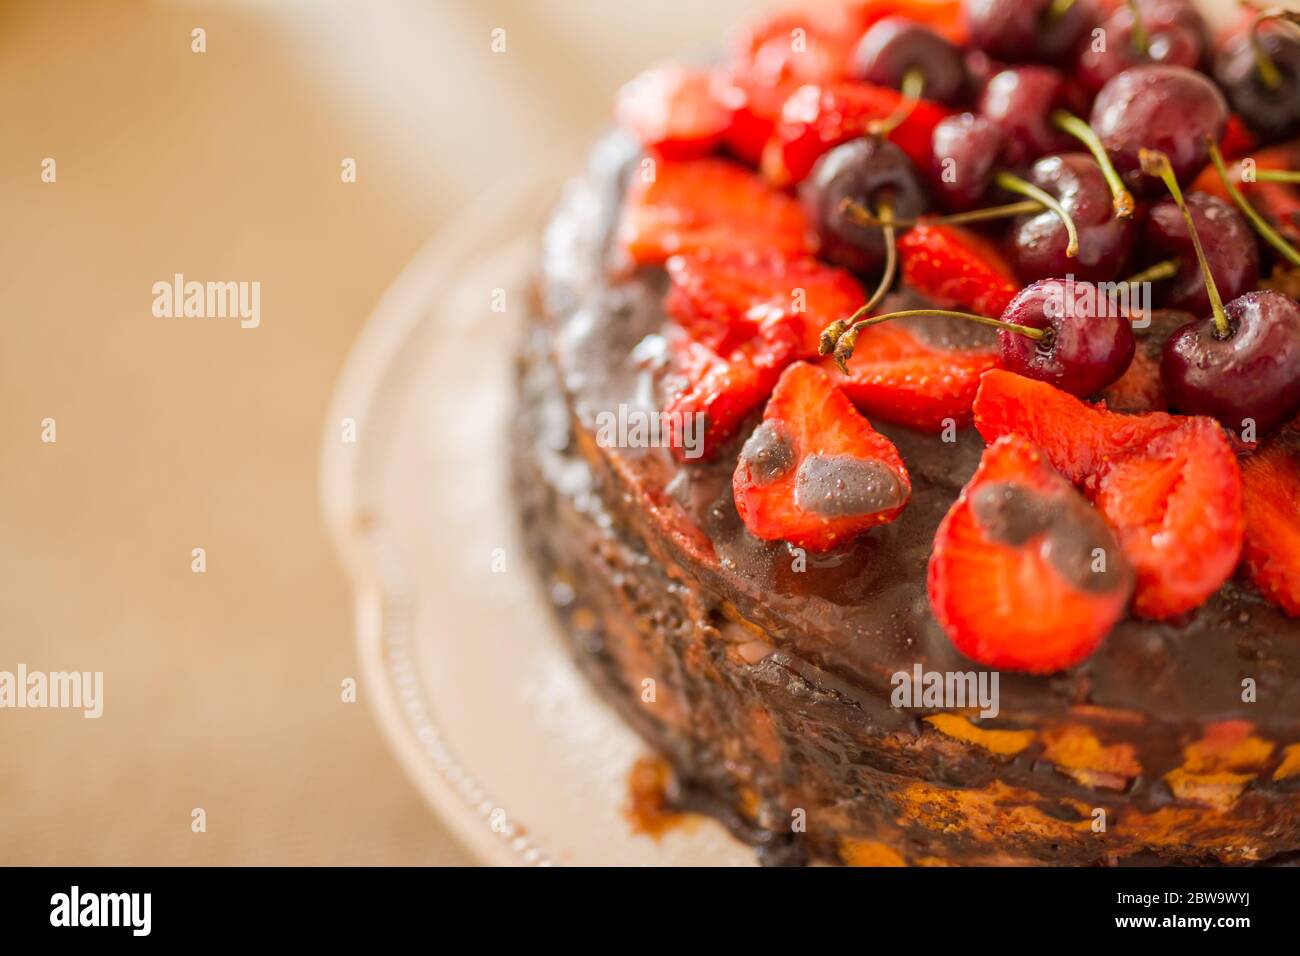 Traditional homemade chocolate cake sweet pastry dessert with brown icing, cherries, raspberry, currant on vintage wooden background. Dark food photo Stock Photo